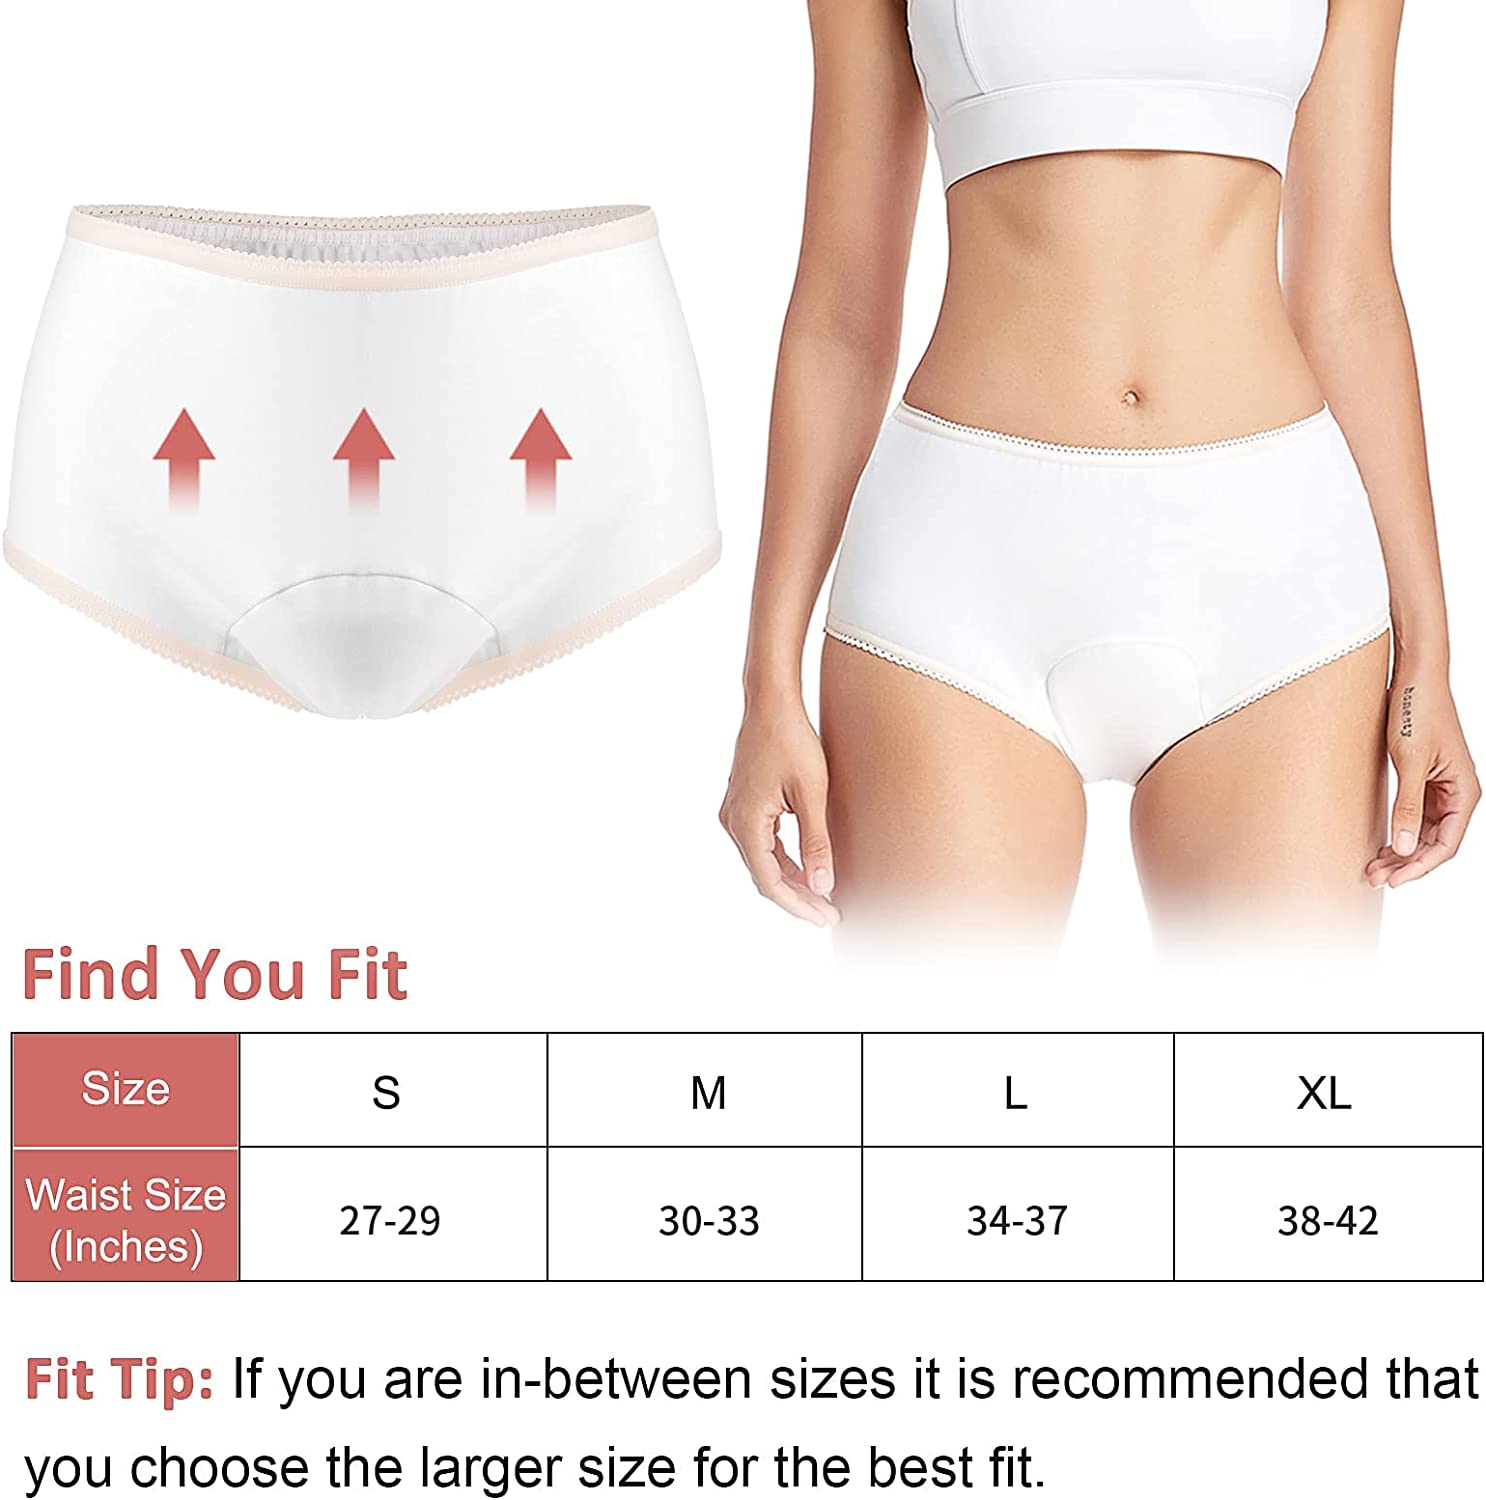 Shhh Women's Seamless Washable Incontinence Underwear - Wearever  Incontinence